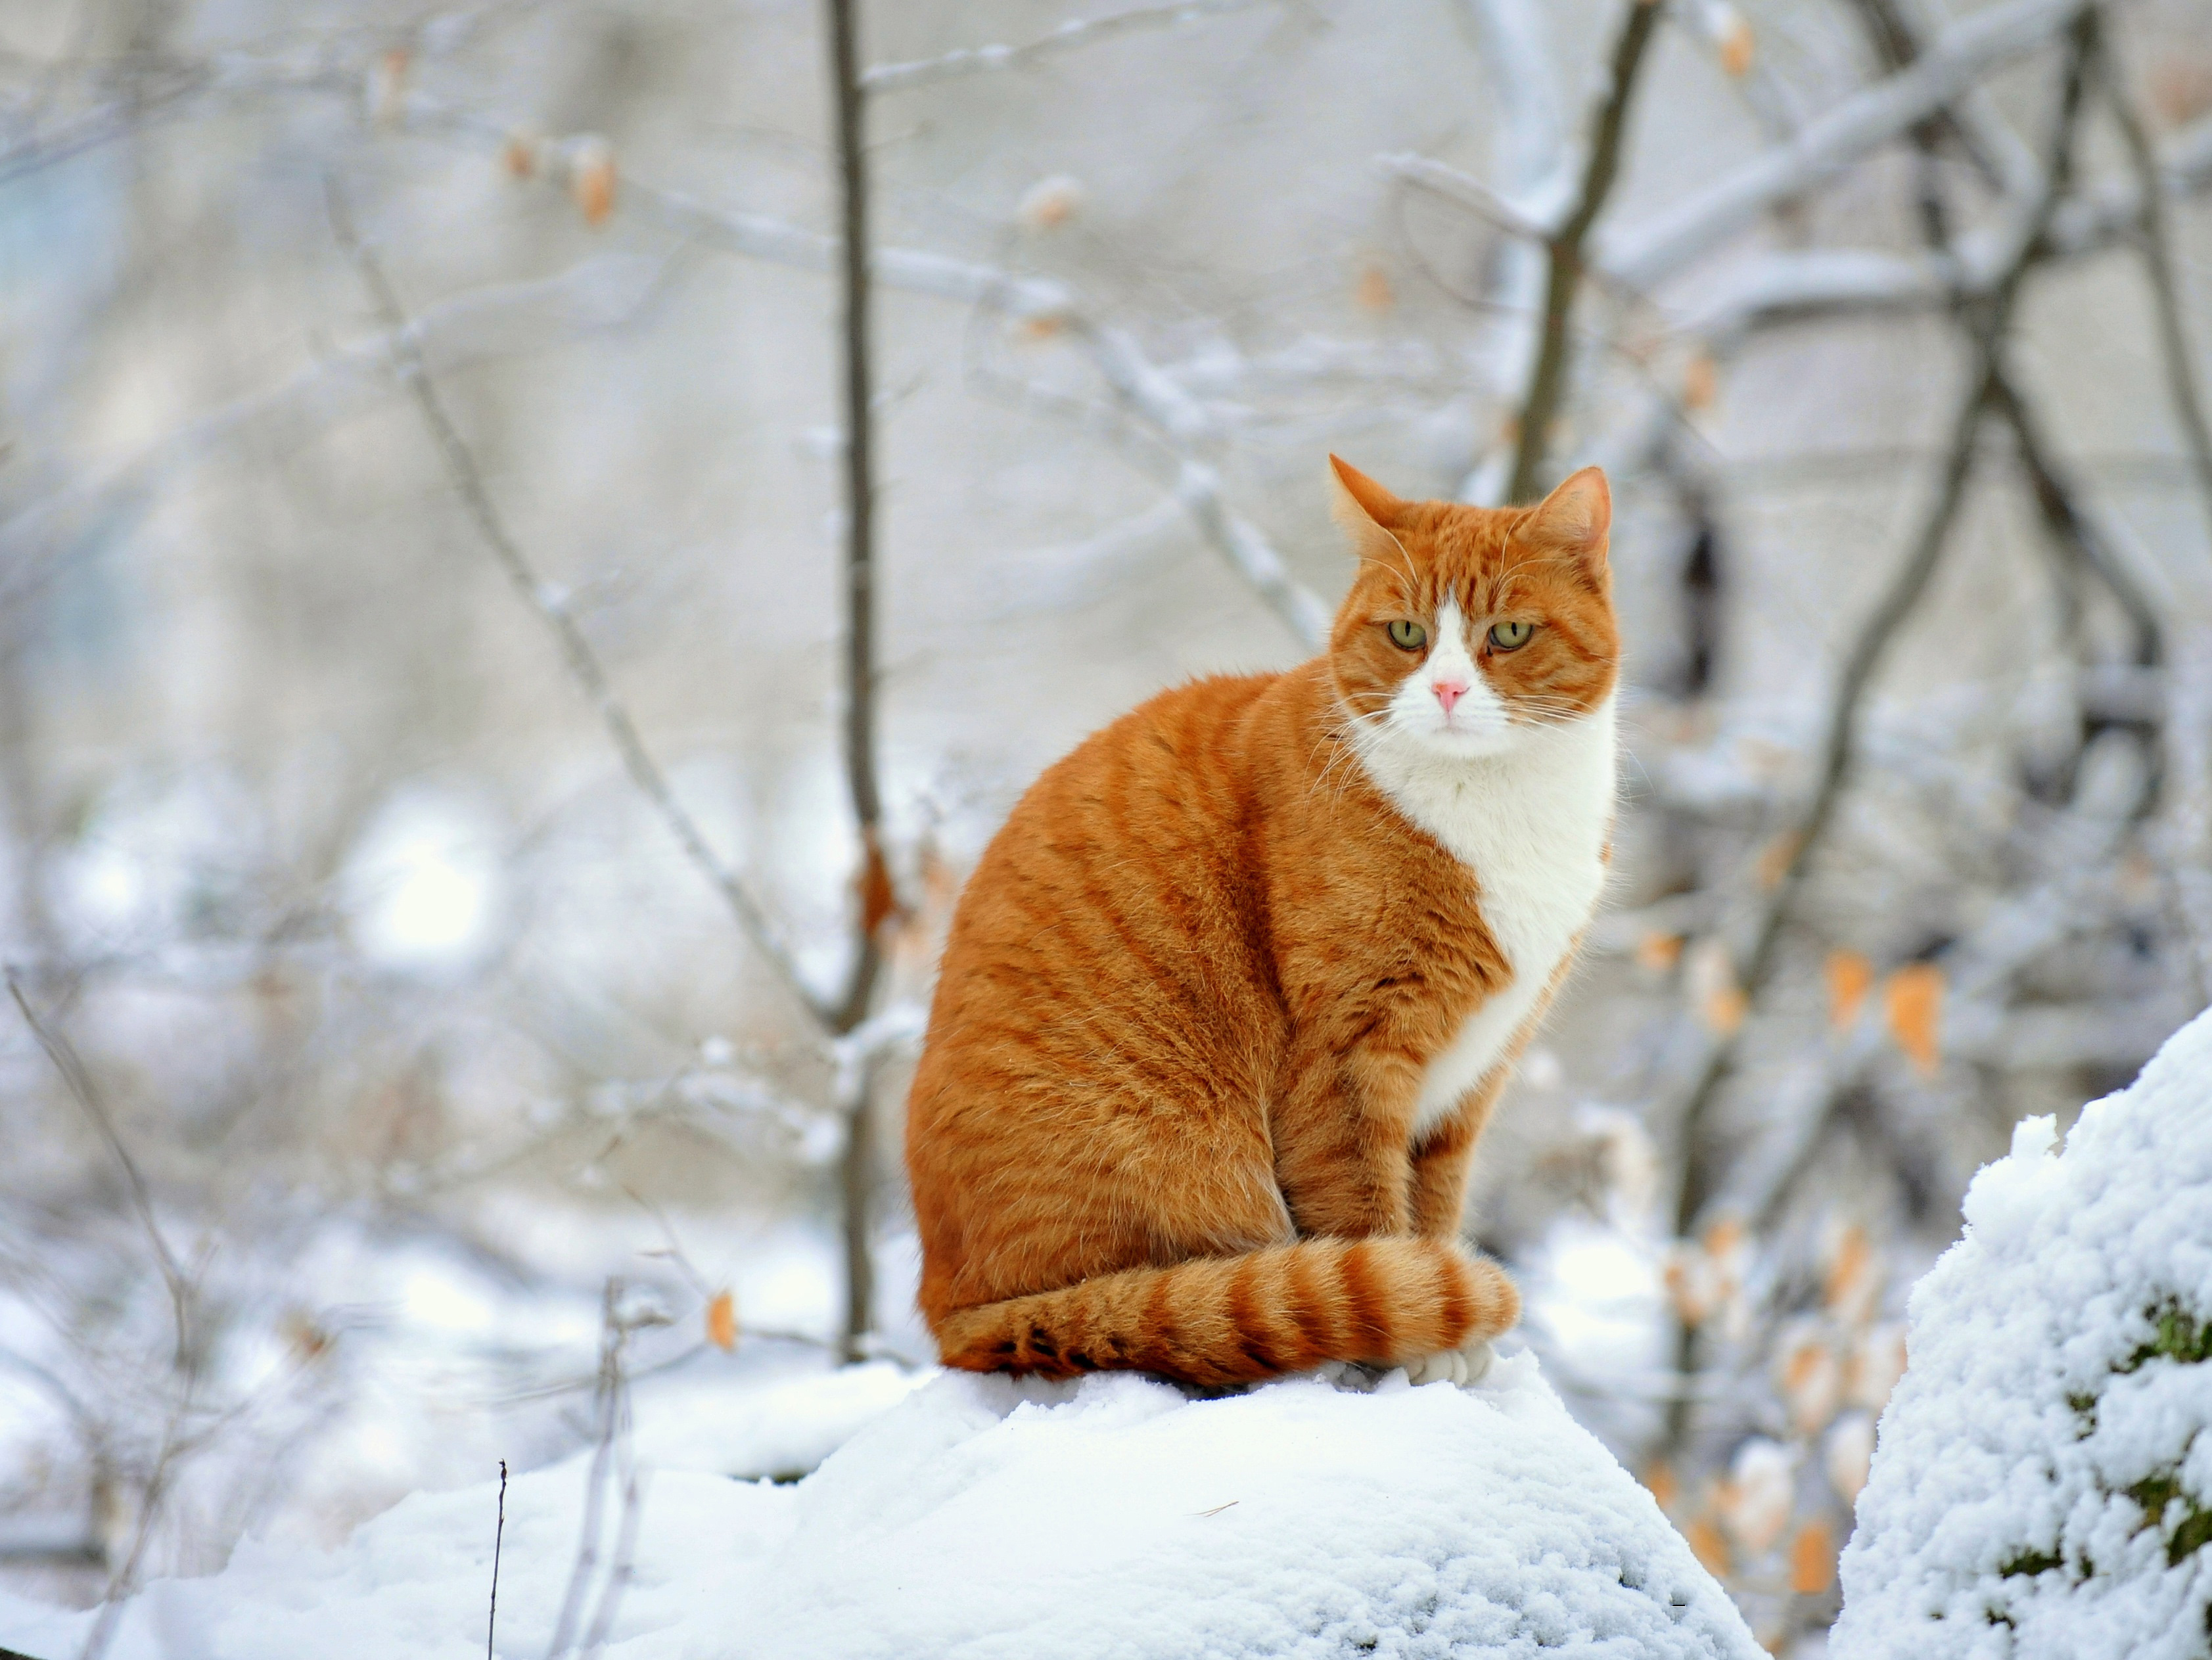 Cat sitting on a snowbank in winter wallpapers and images   wallpapers 3366x2526